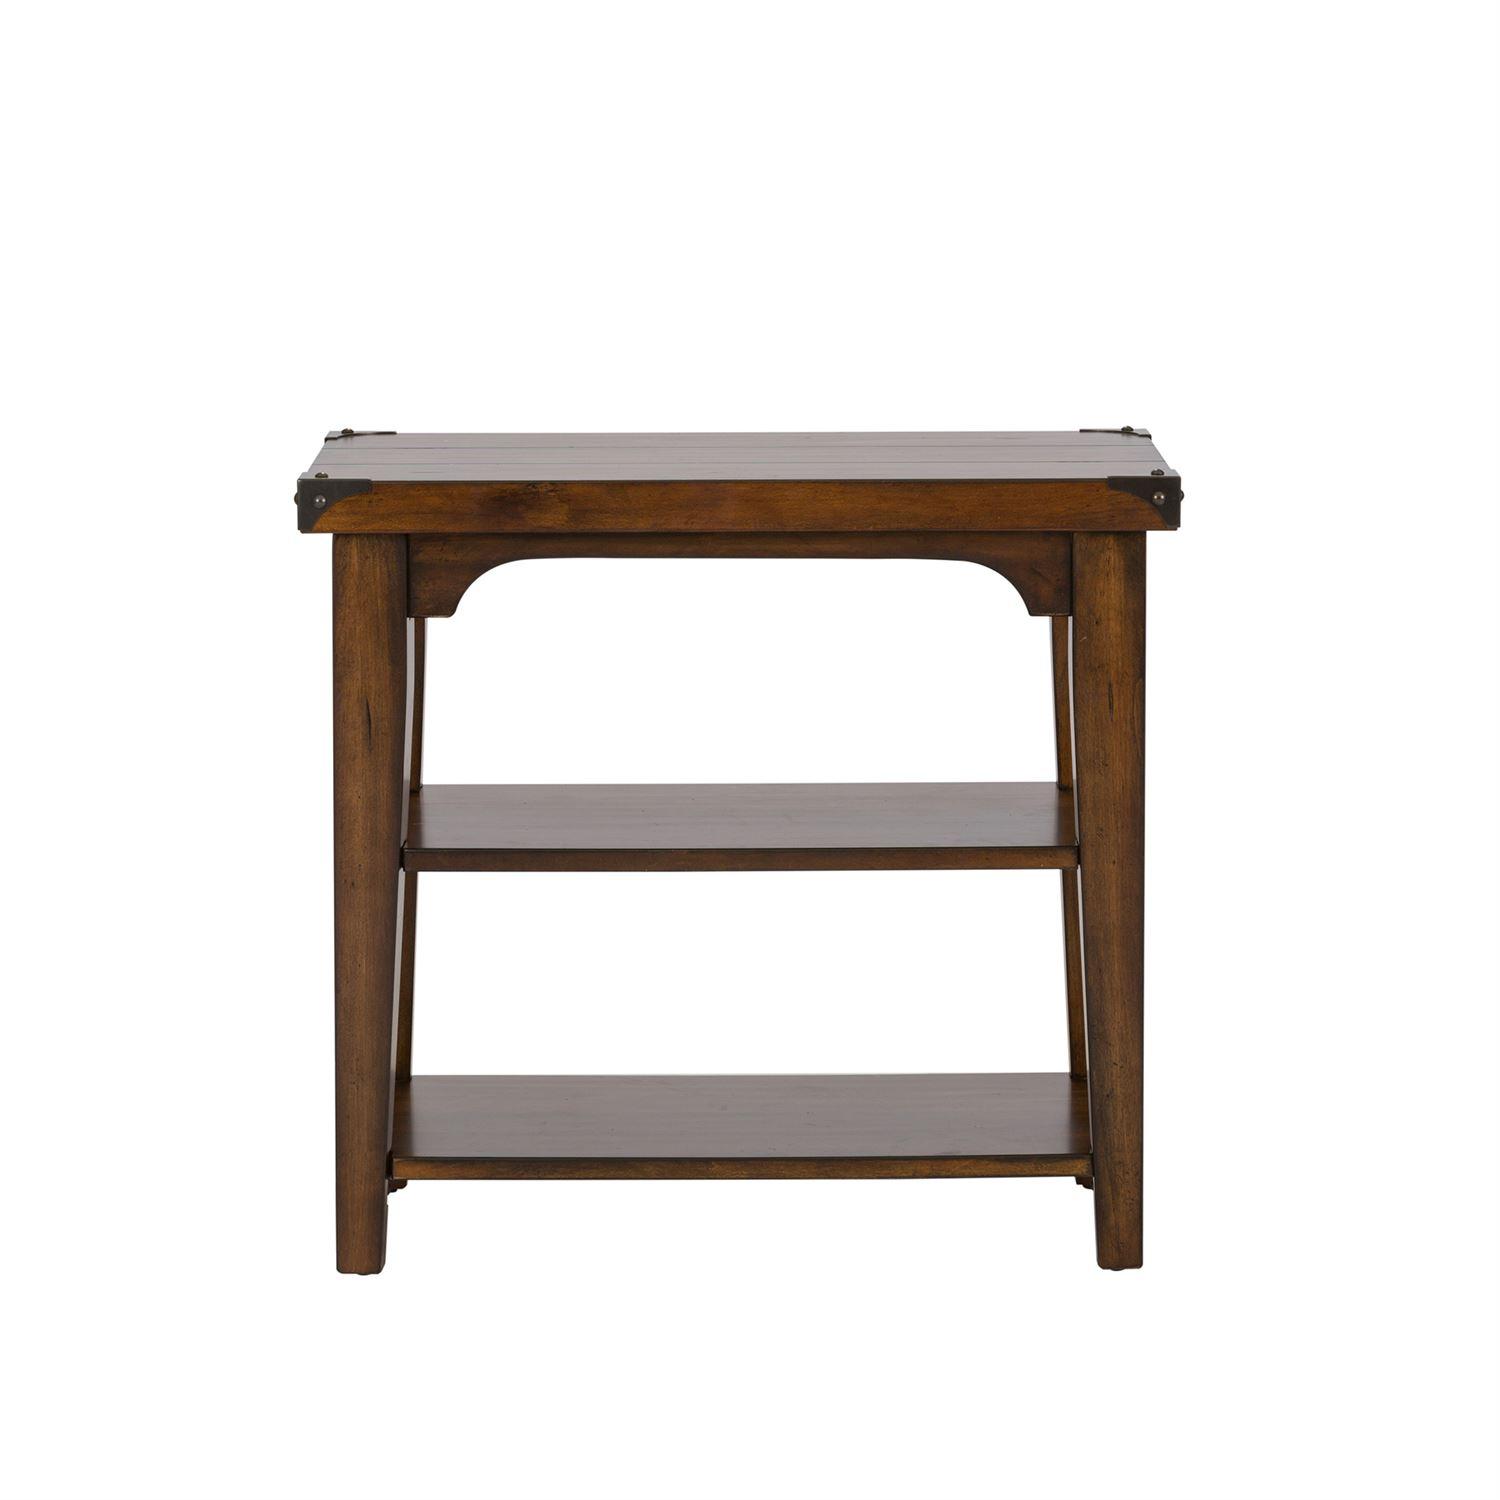 

    
Rustic Brown Wood End Table 316-OT1021 Liberty Furniture
